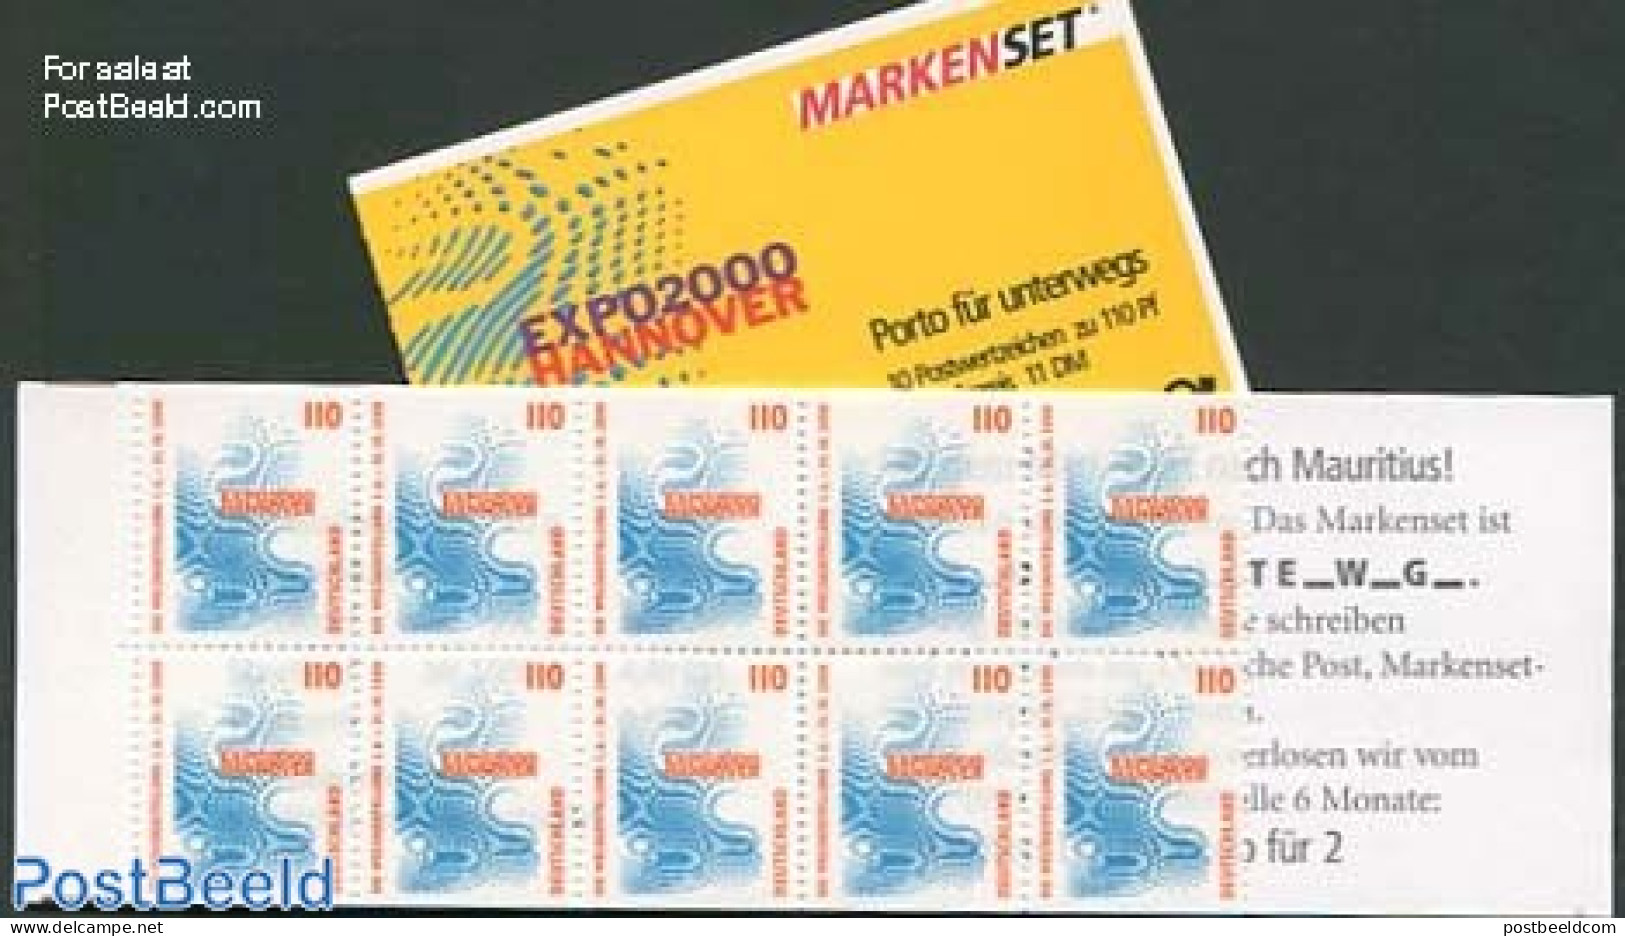 Germany, Federal Republic 1998 Expo Hannover Booklet, Mint NH, Various - Stamp Booklets - World Expositions - Ongebruikt